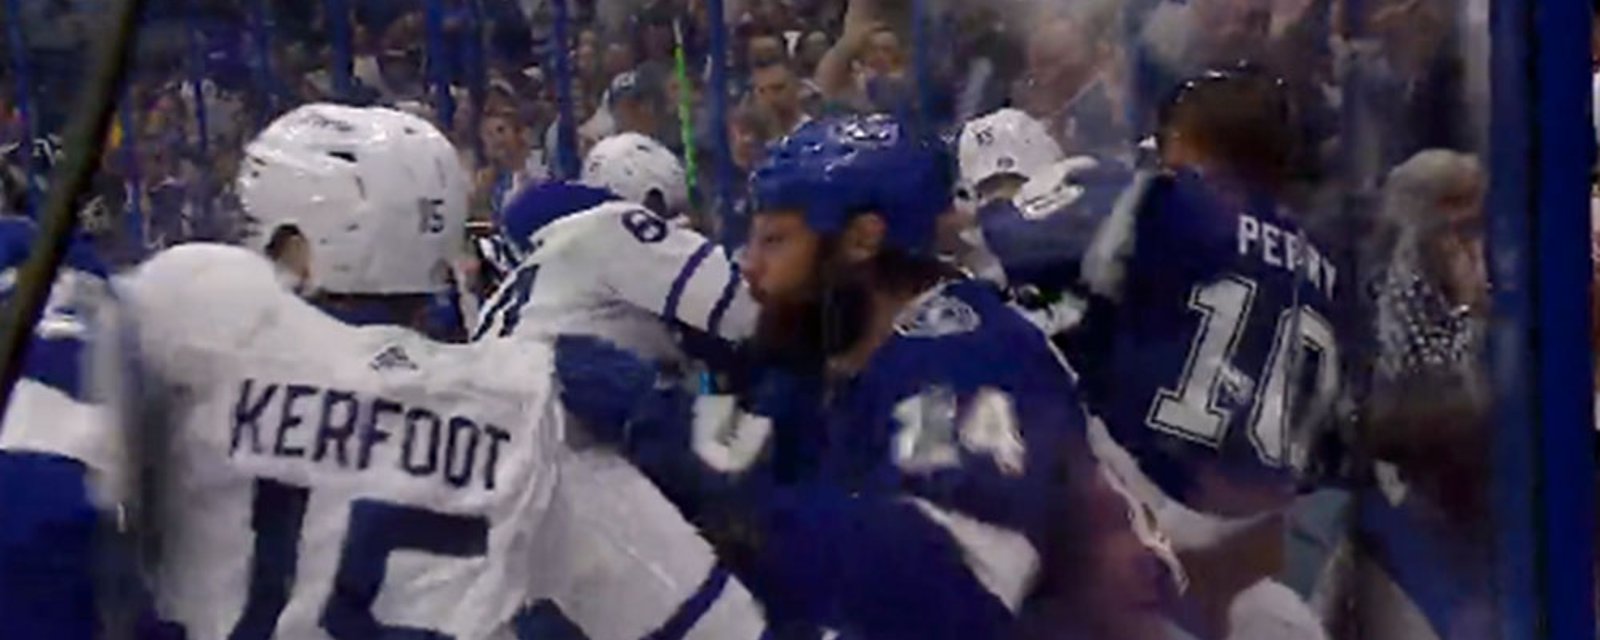 Things go off the rails in late stages of blowout game between Leafs and Lightning